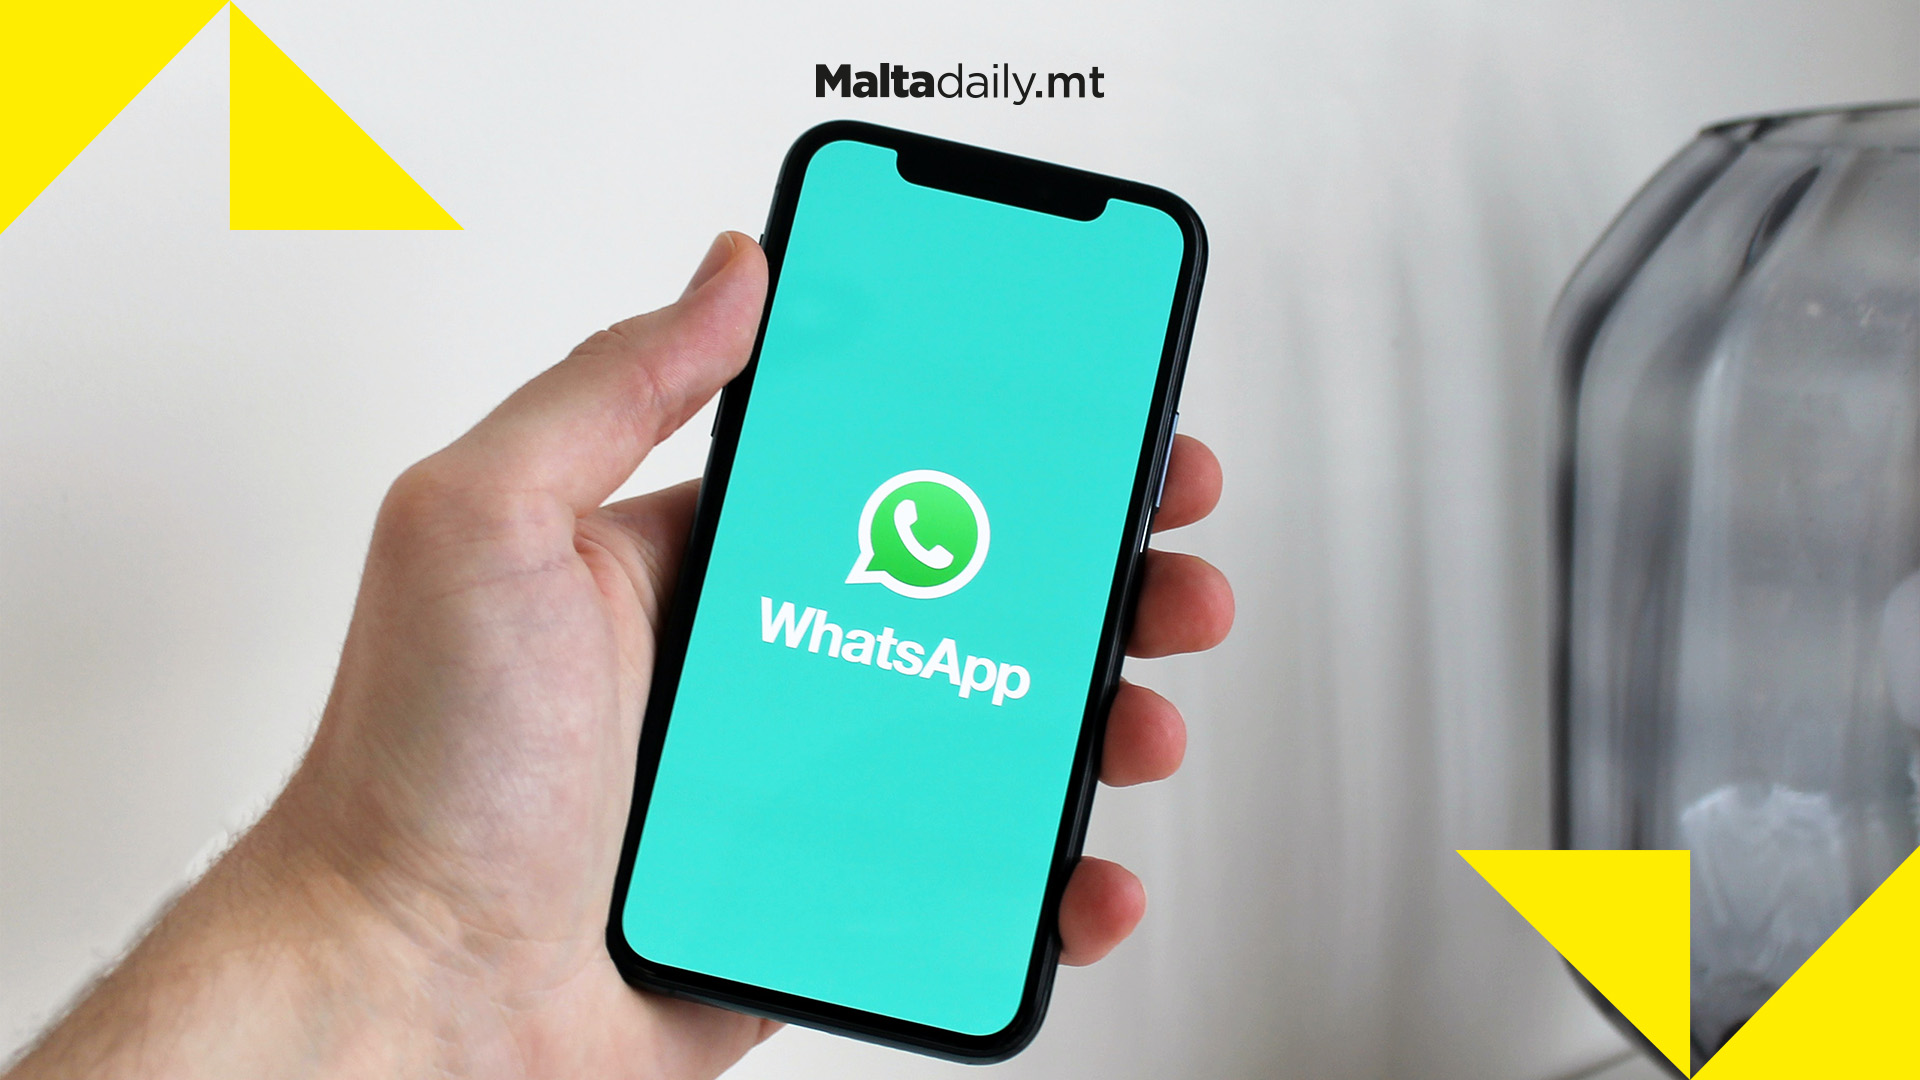 Is SMS dead? Malta sends 10.7 million less text messages as WhatsApp & Messenger take over